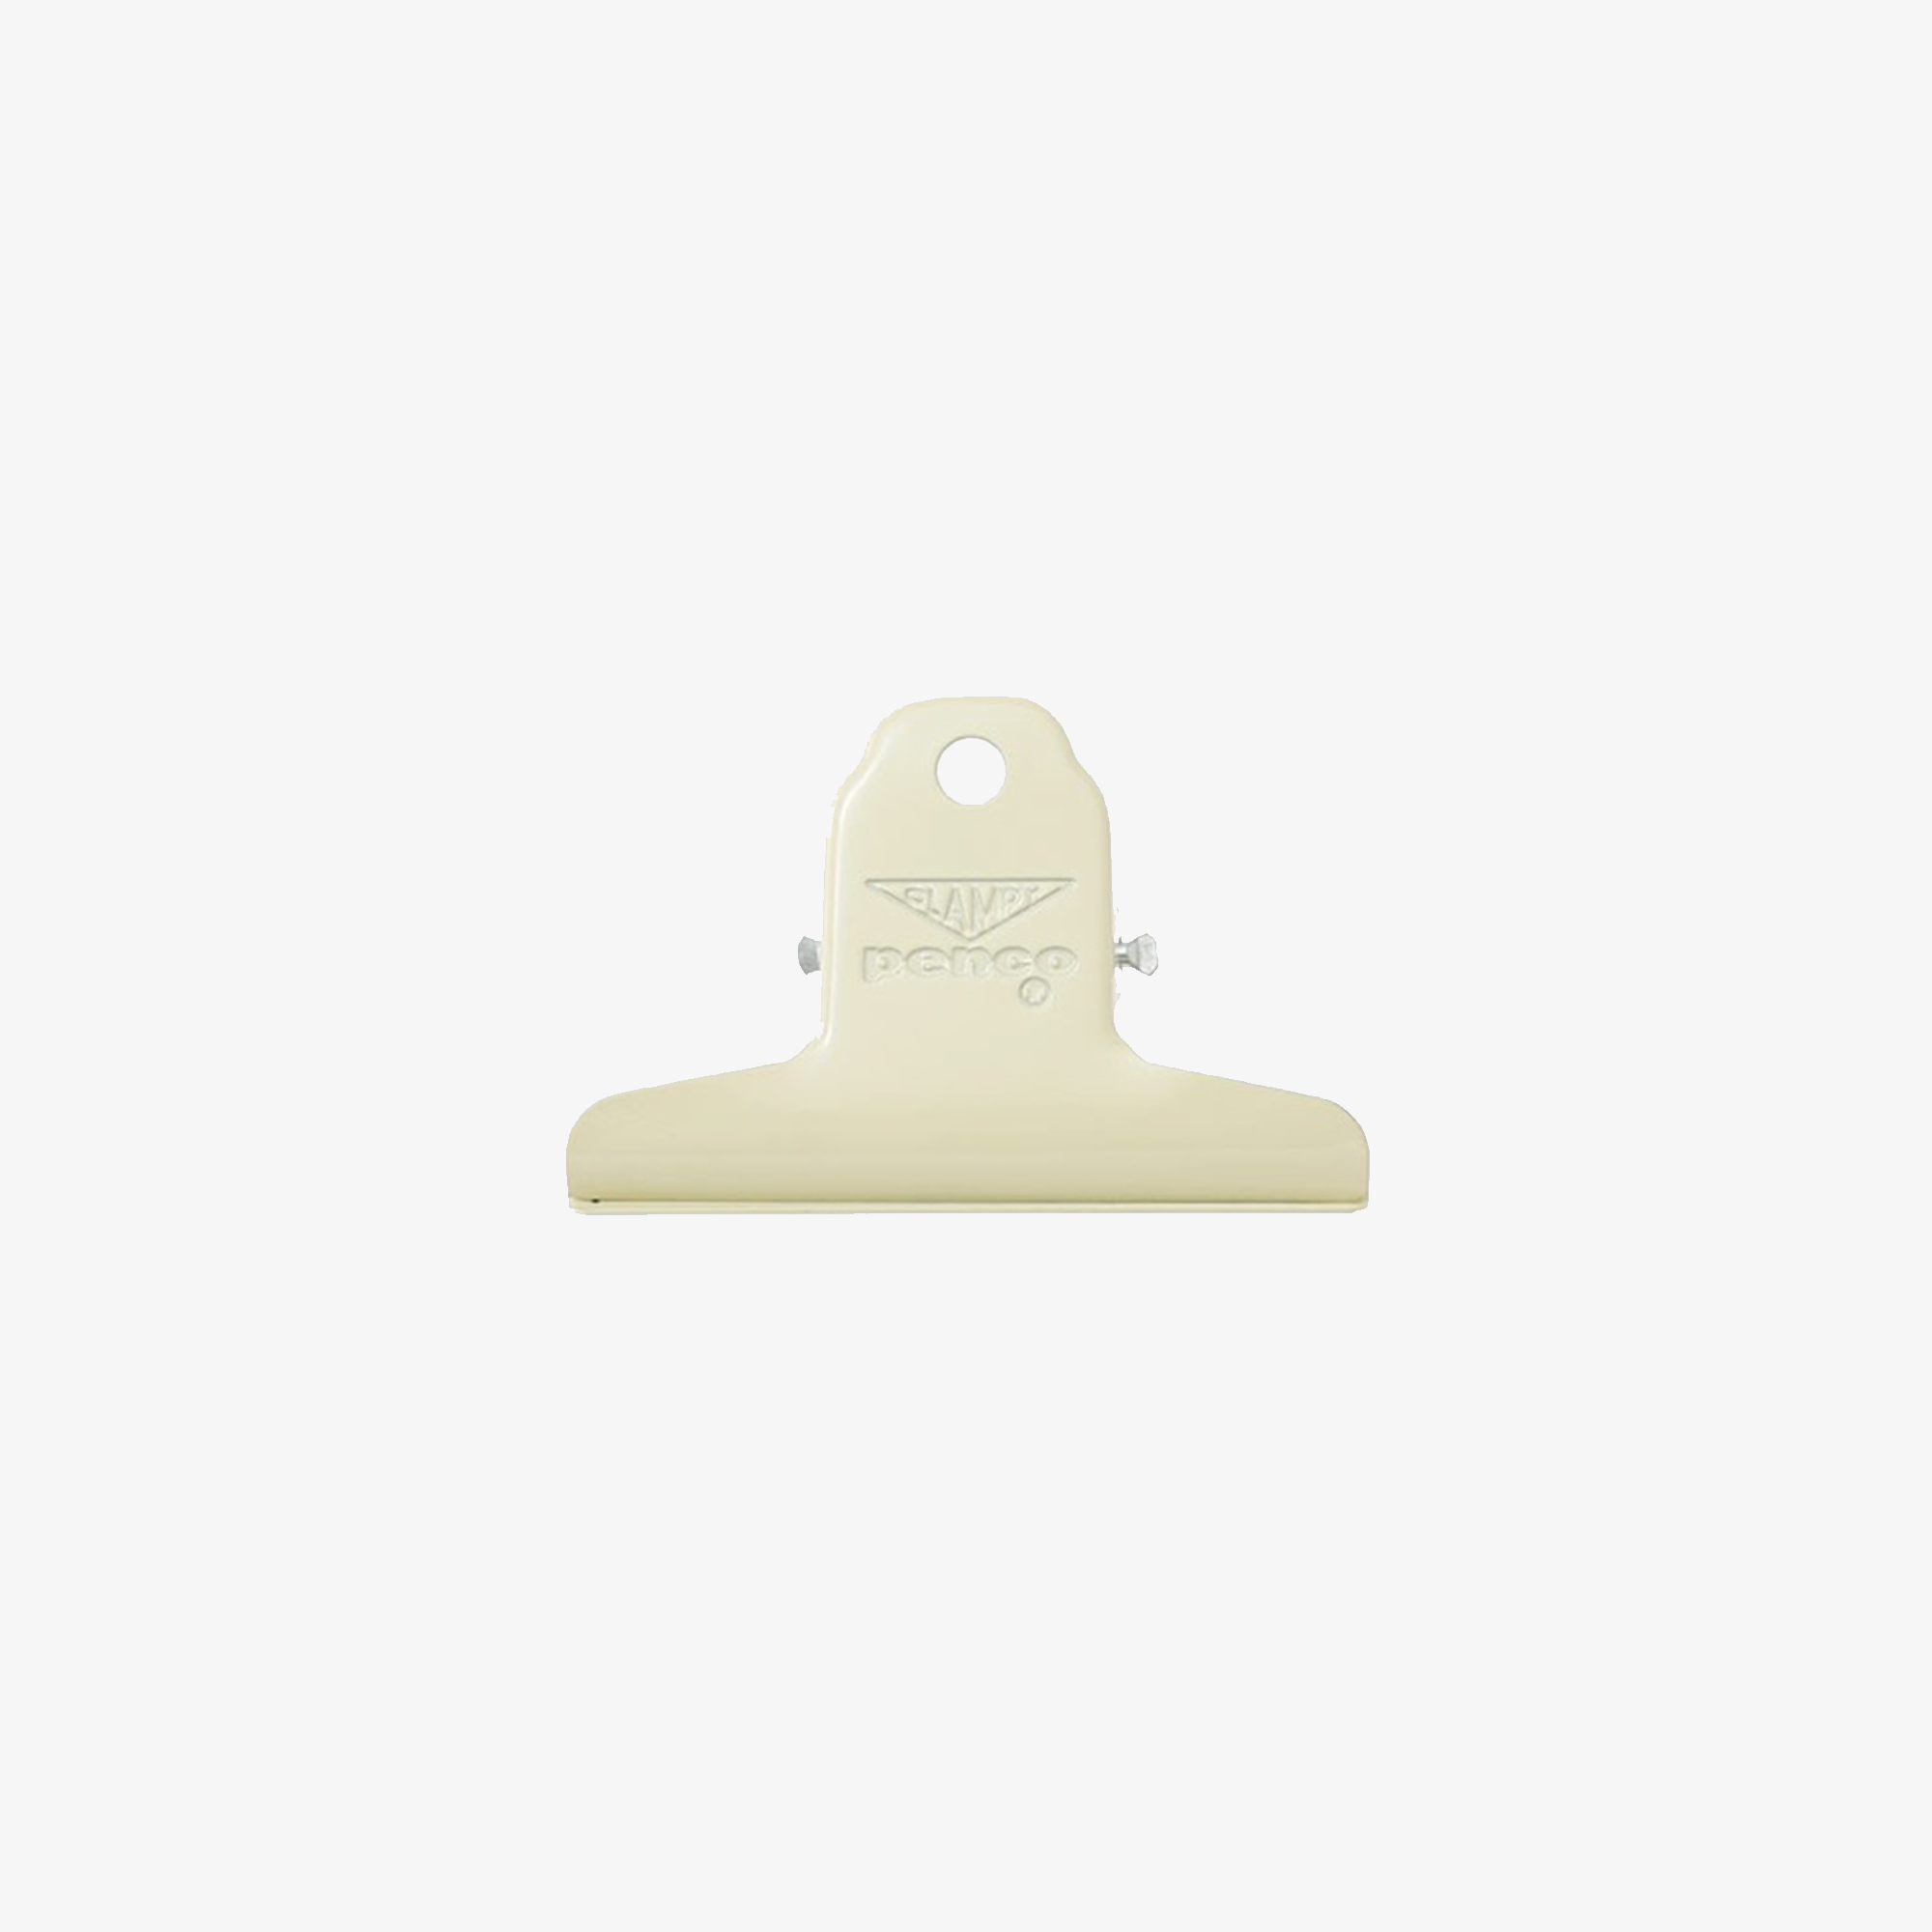 CLAMPY CLIP S // IVORY